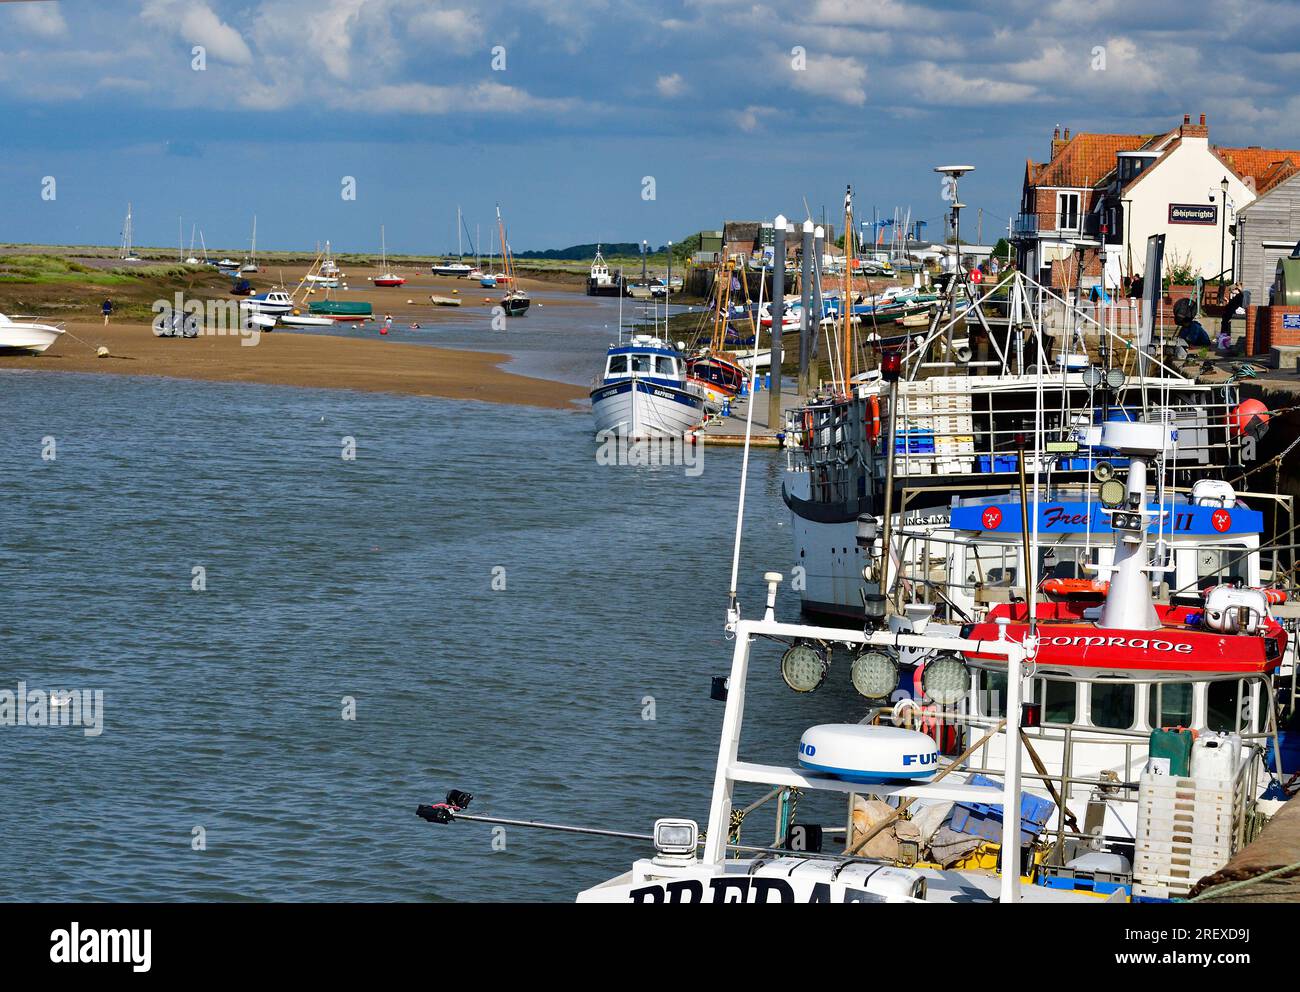 The fishing port and holiday destination of Wells-next-the-Sea in high summer 2023 on the North Norfolk coast England, UK Stock Photo